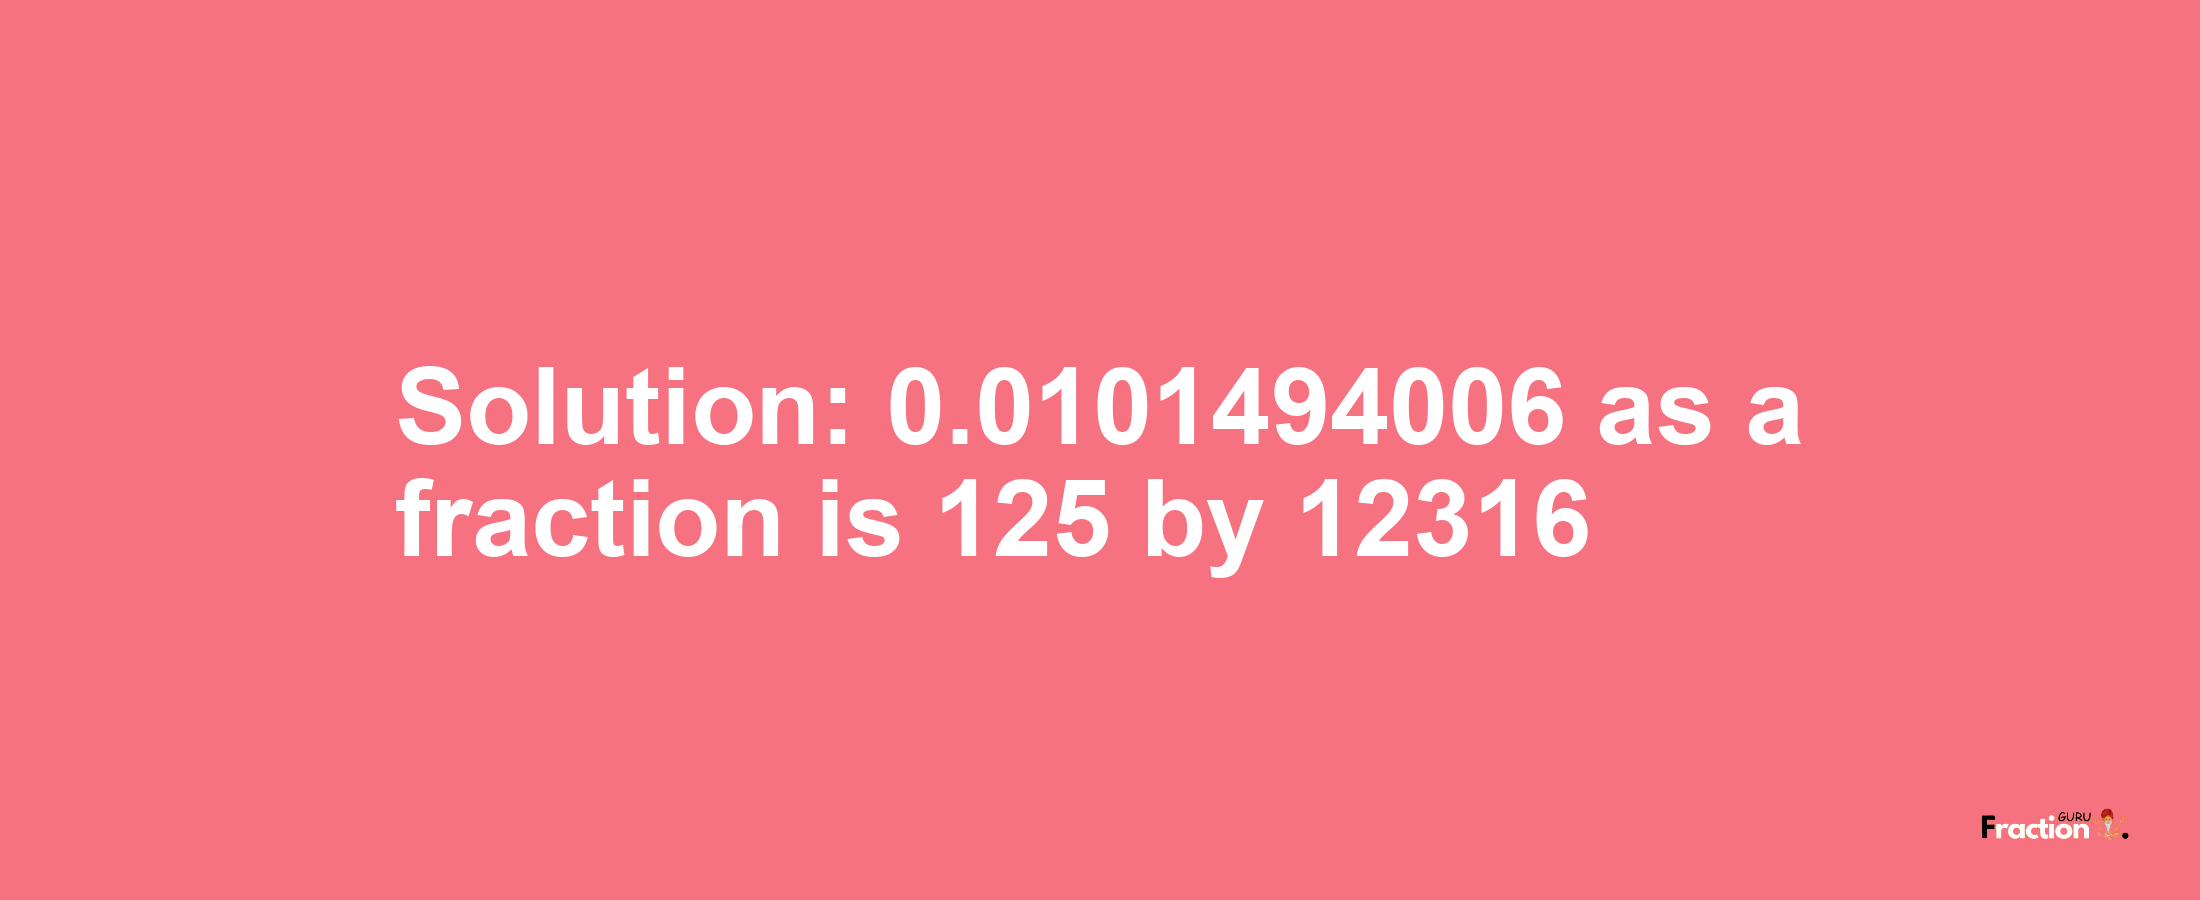 Solution:0.0101494006 as a fraction is 125/12316